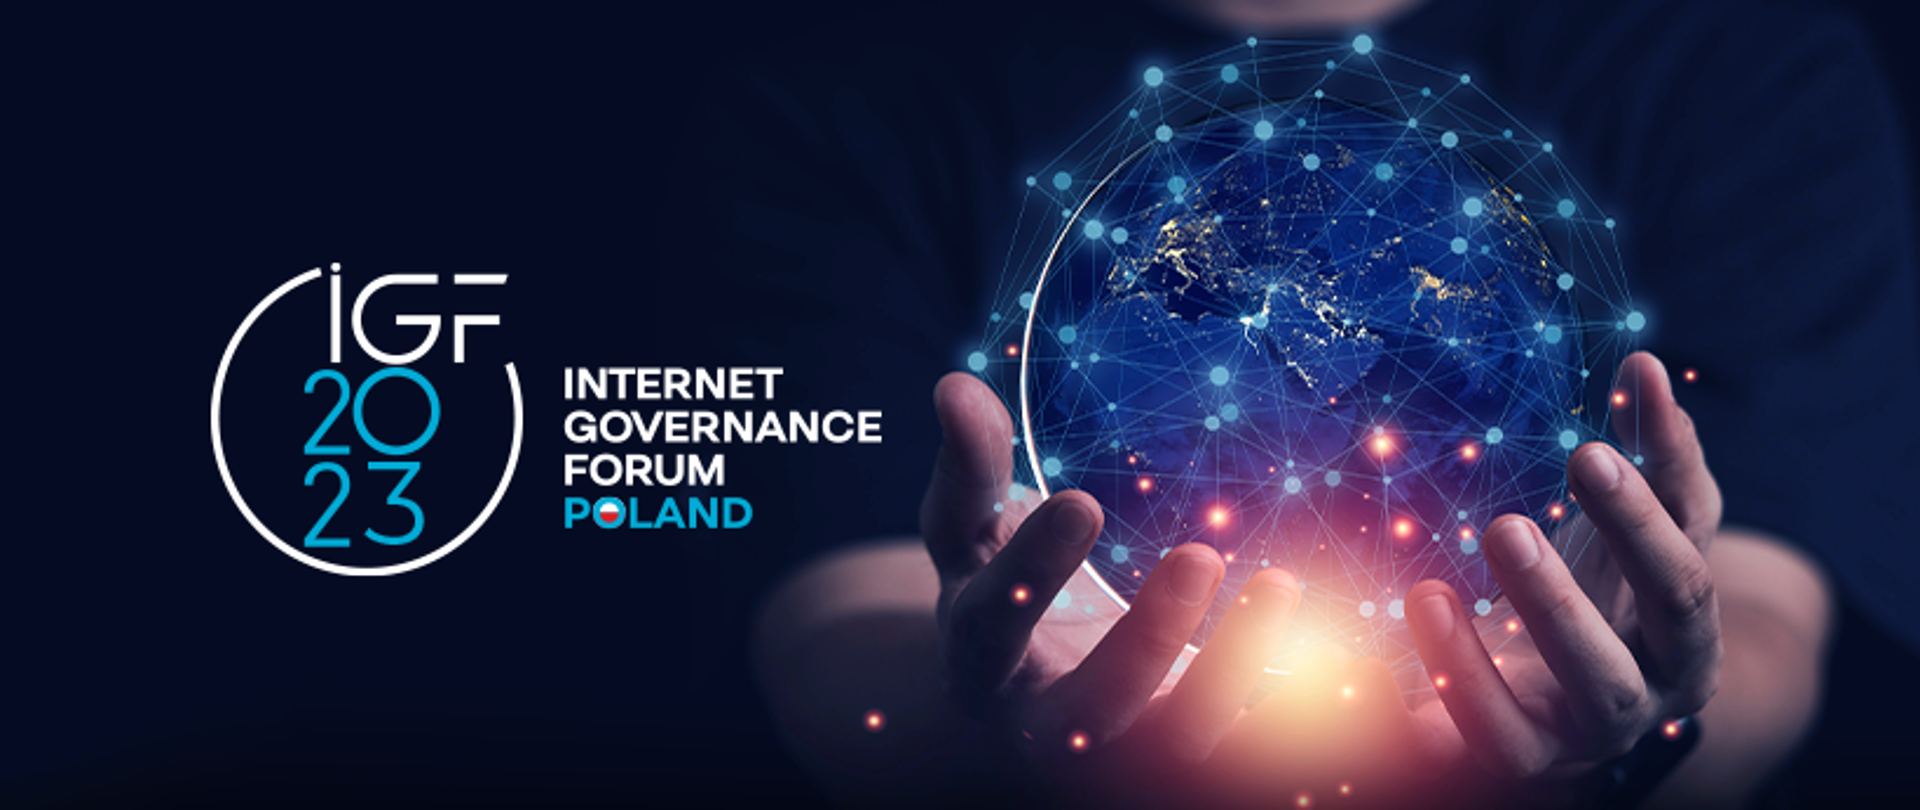 The graphic depicts hands holding a globe rotated with a view of Europe, Africa and the Middle East, entwined with a grid of connections symbolizing the global Internet. Next to the graphic is a logotype with the words Internet Governance Forum Poland and the acronym IGF 2023.